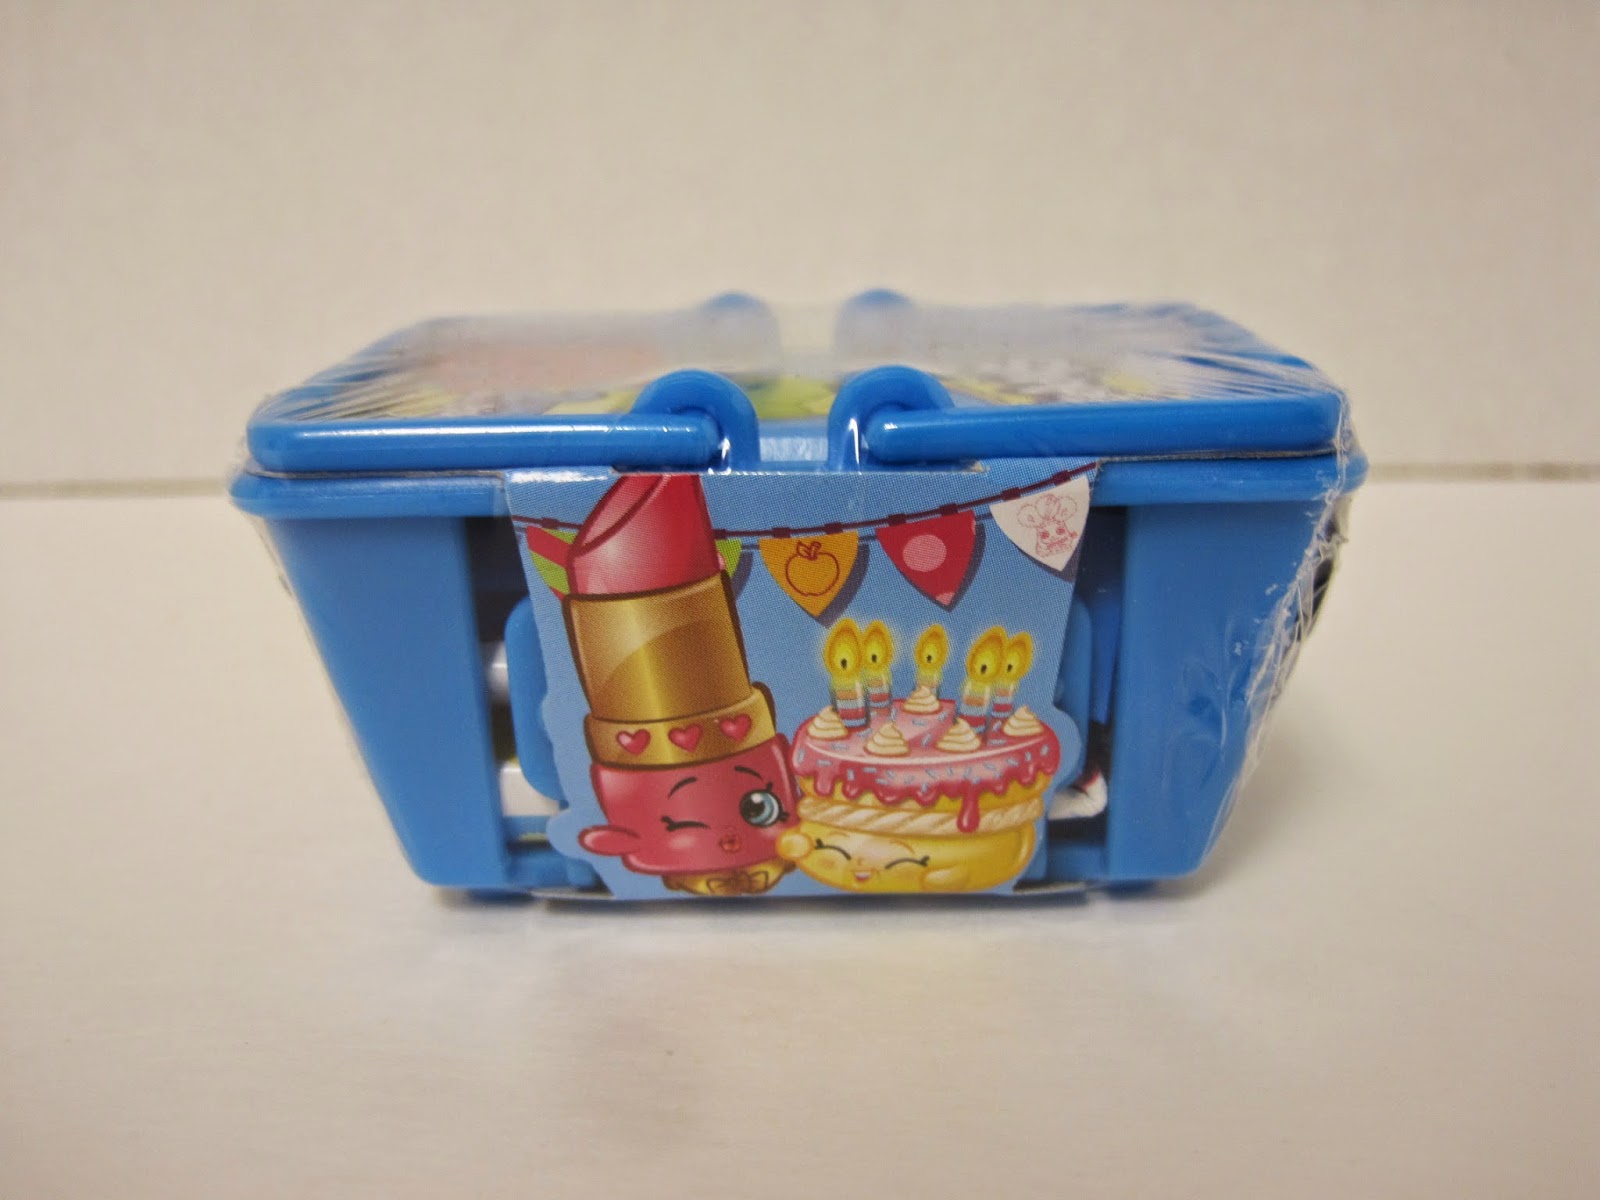 Shopkins Real Littles Icy Treats Collection - Family Clan Blog